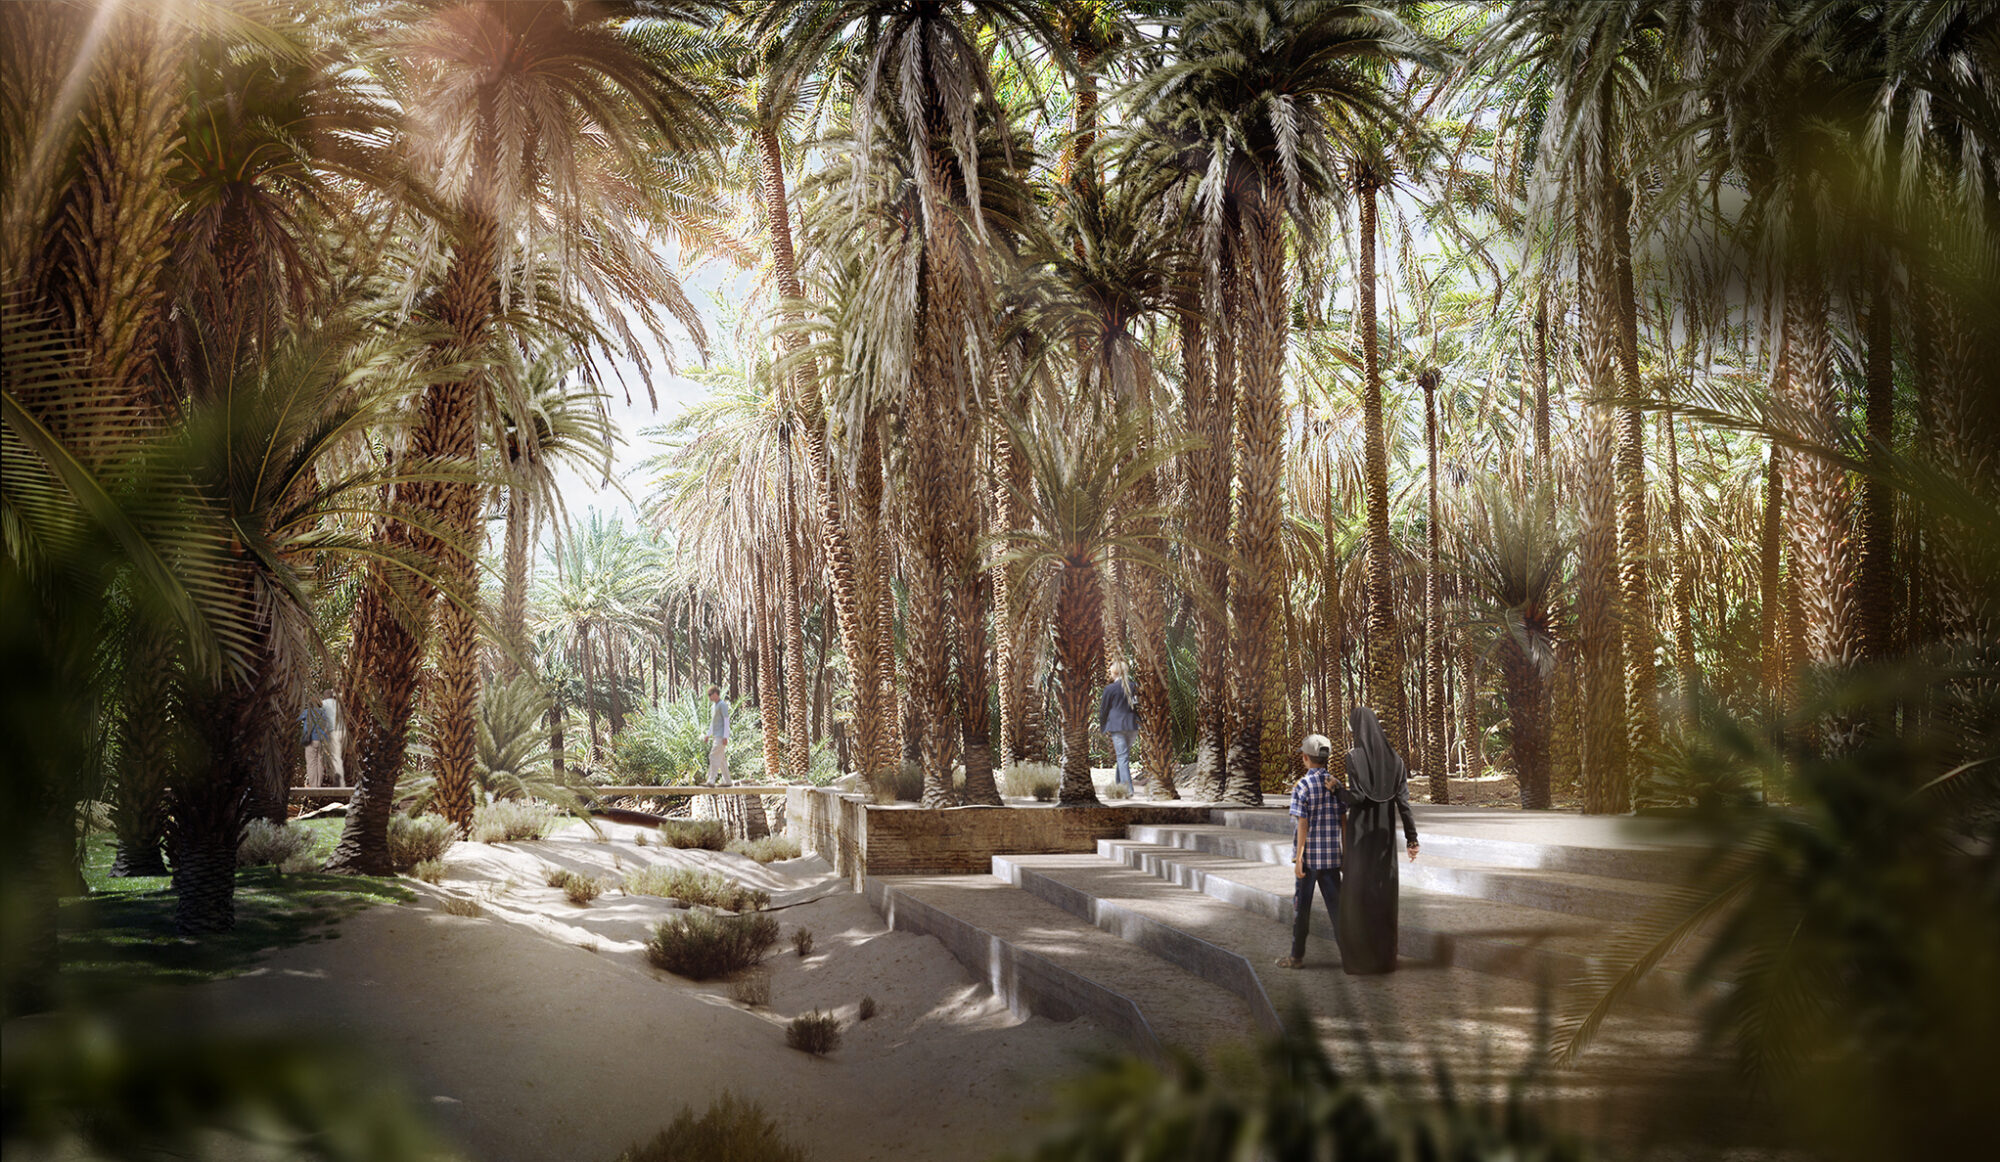 A 20km public realm to engage the community and visitors in the heritage of AlUla and the oasis Districts together from north to south while acting as the life-giving green belt of the masterplan.